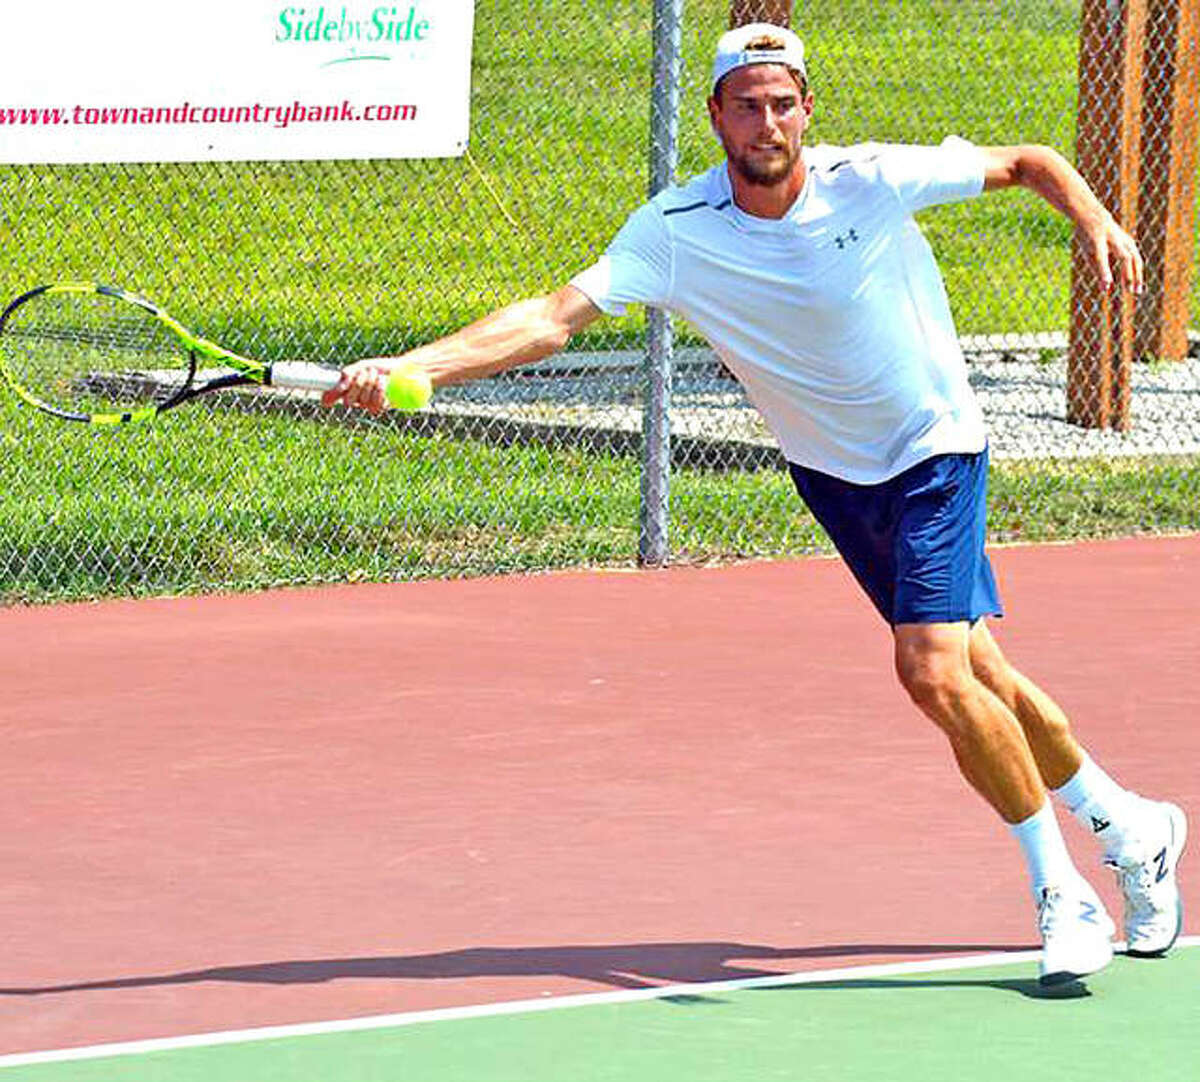 Maxime Cressy of France returns a shot on Monday during his Futures Qualifying Tourney singles match against Charles Broom of the UK at the Edwardsville High Tennis Center.